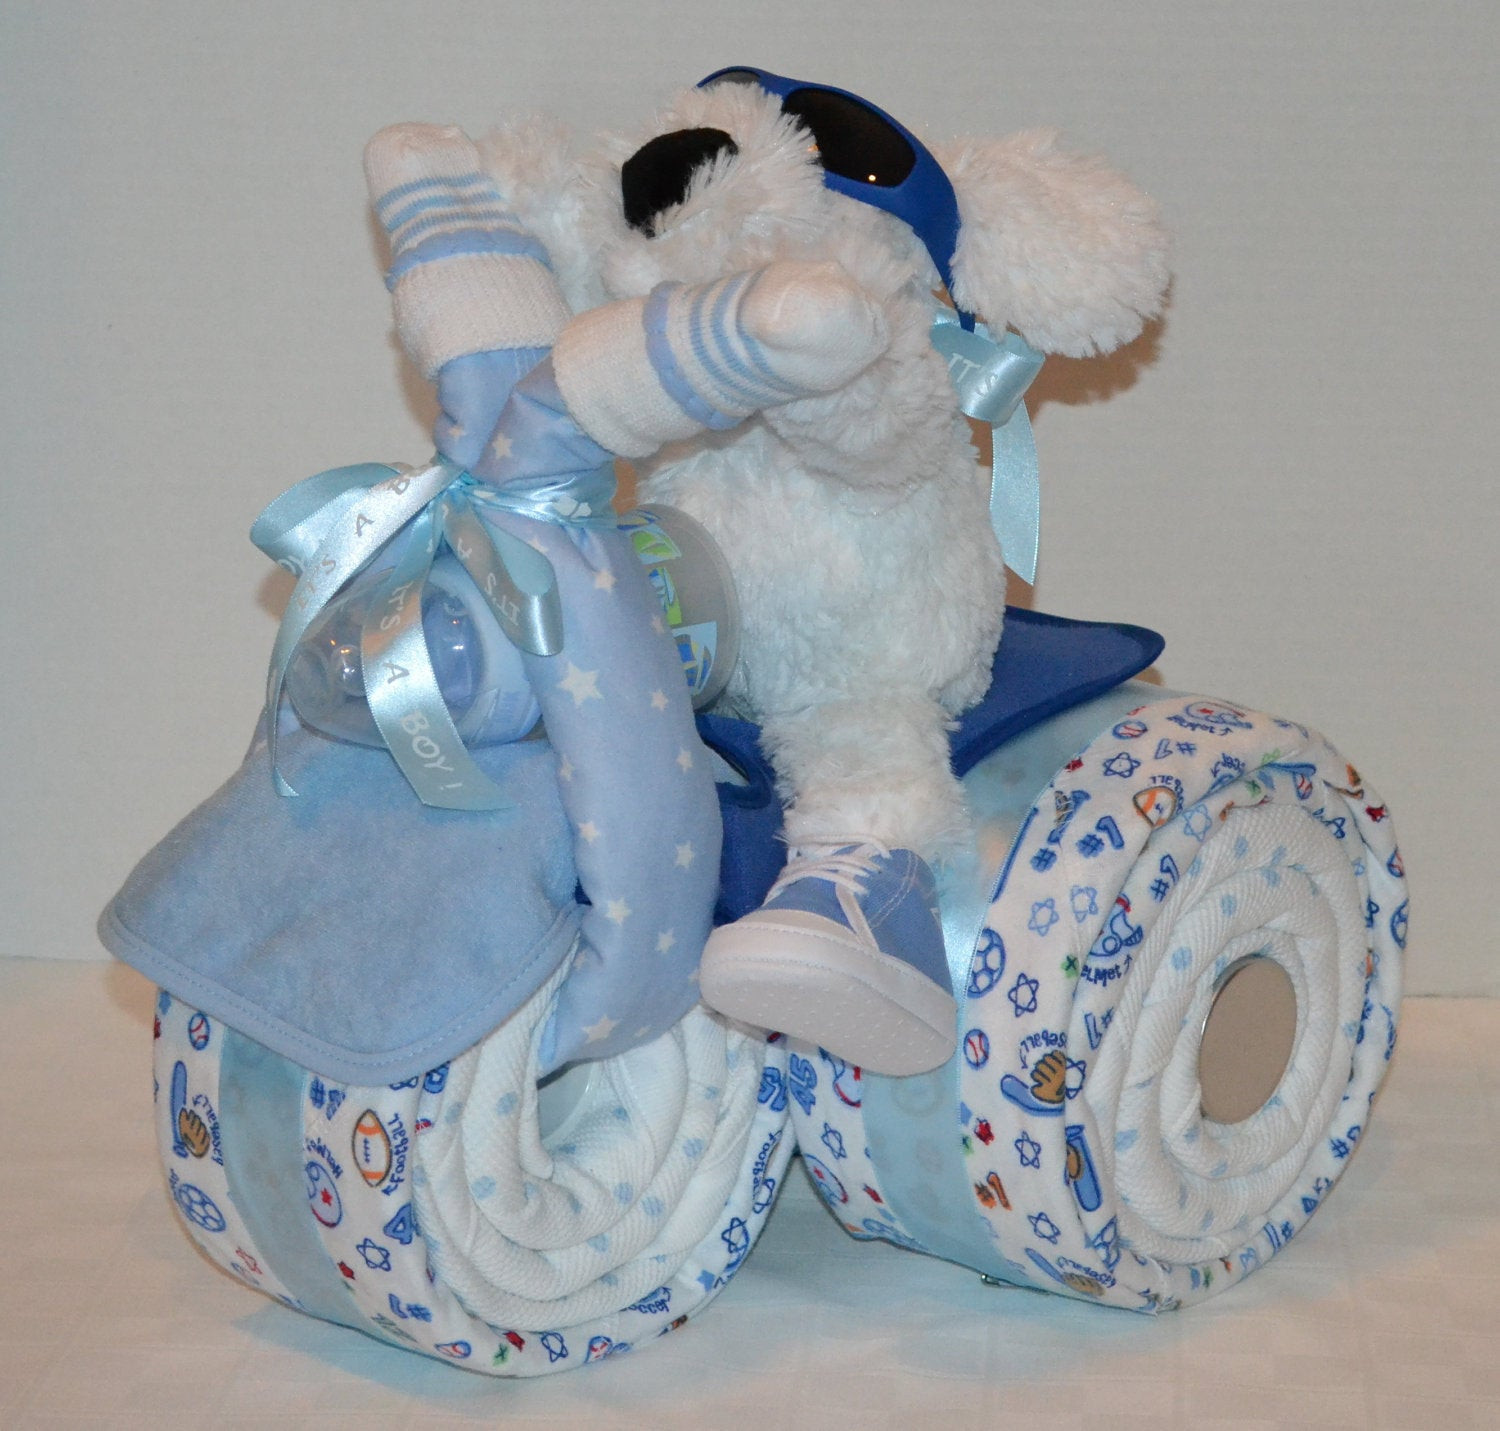 Sports Gift Ideas For Boys
 Tricycle Trike Diaper Cake Baby Shower Gift Sports theme